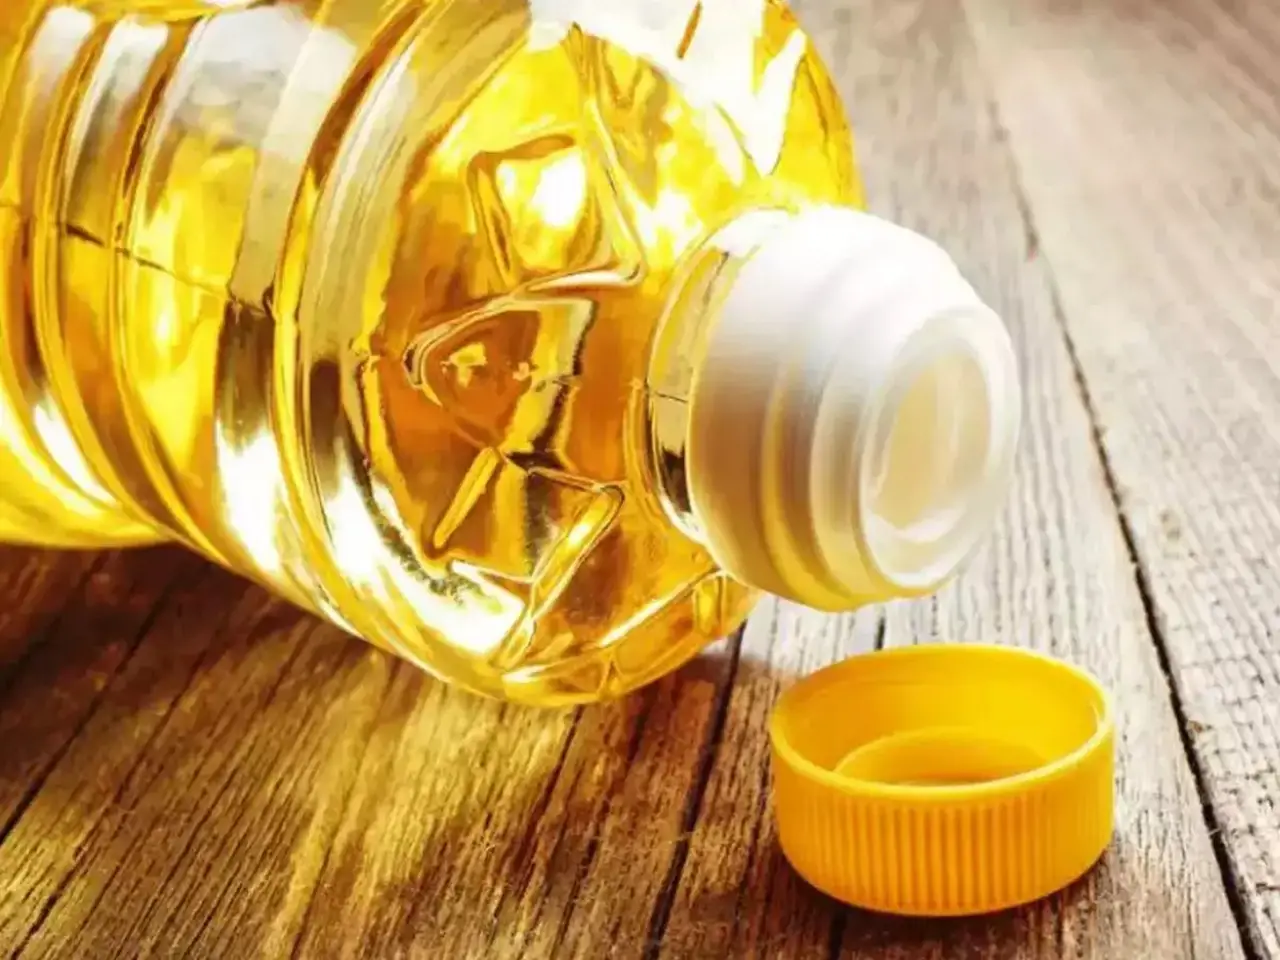 India consumption and imports jump to  131.3 lakh tonnes of edible oils in the 2020-21 oil year for in the previous year.